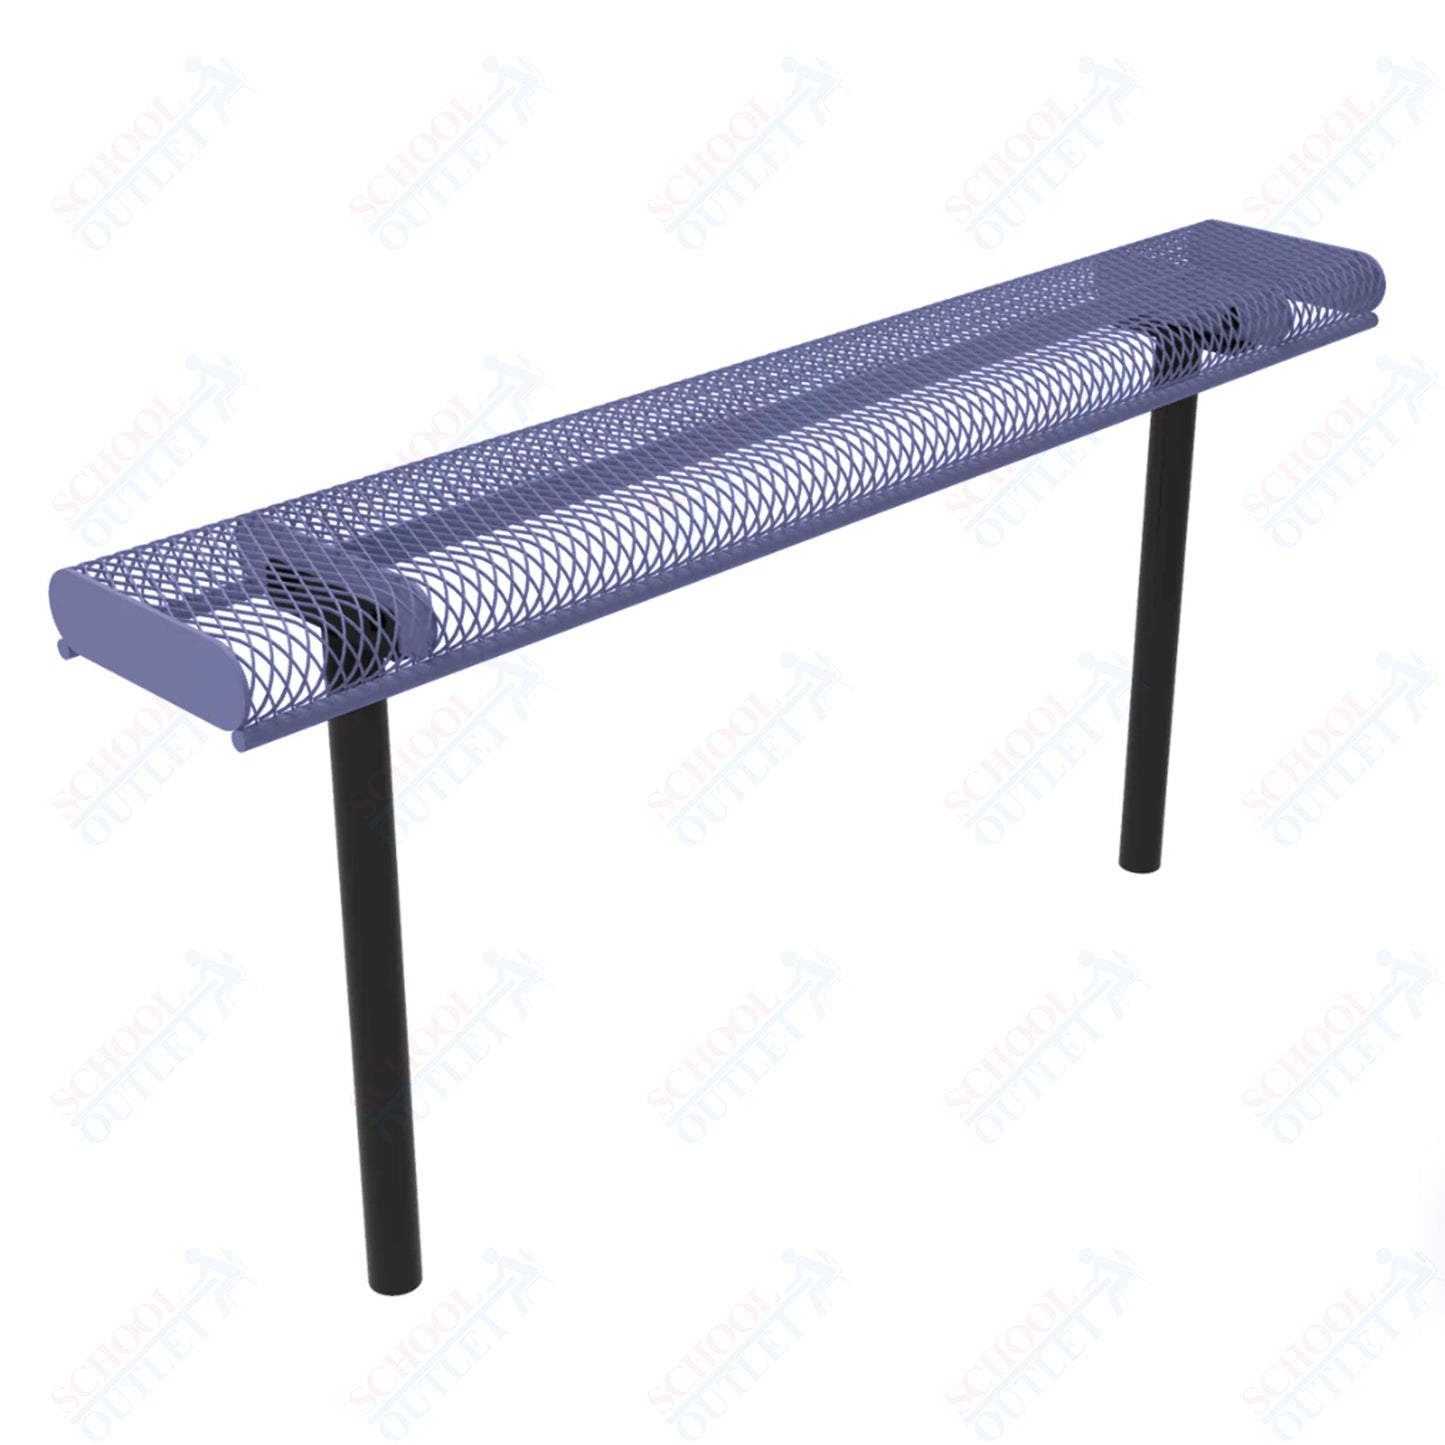 MyTcoat - Rolled Edges Outdoor Bench without Back 4' L - Inground Mount (MYT-BRE04-22)